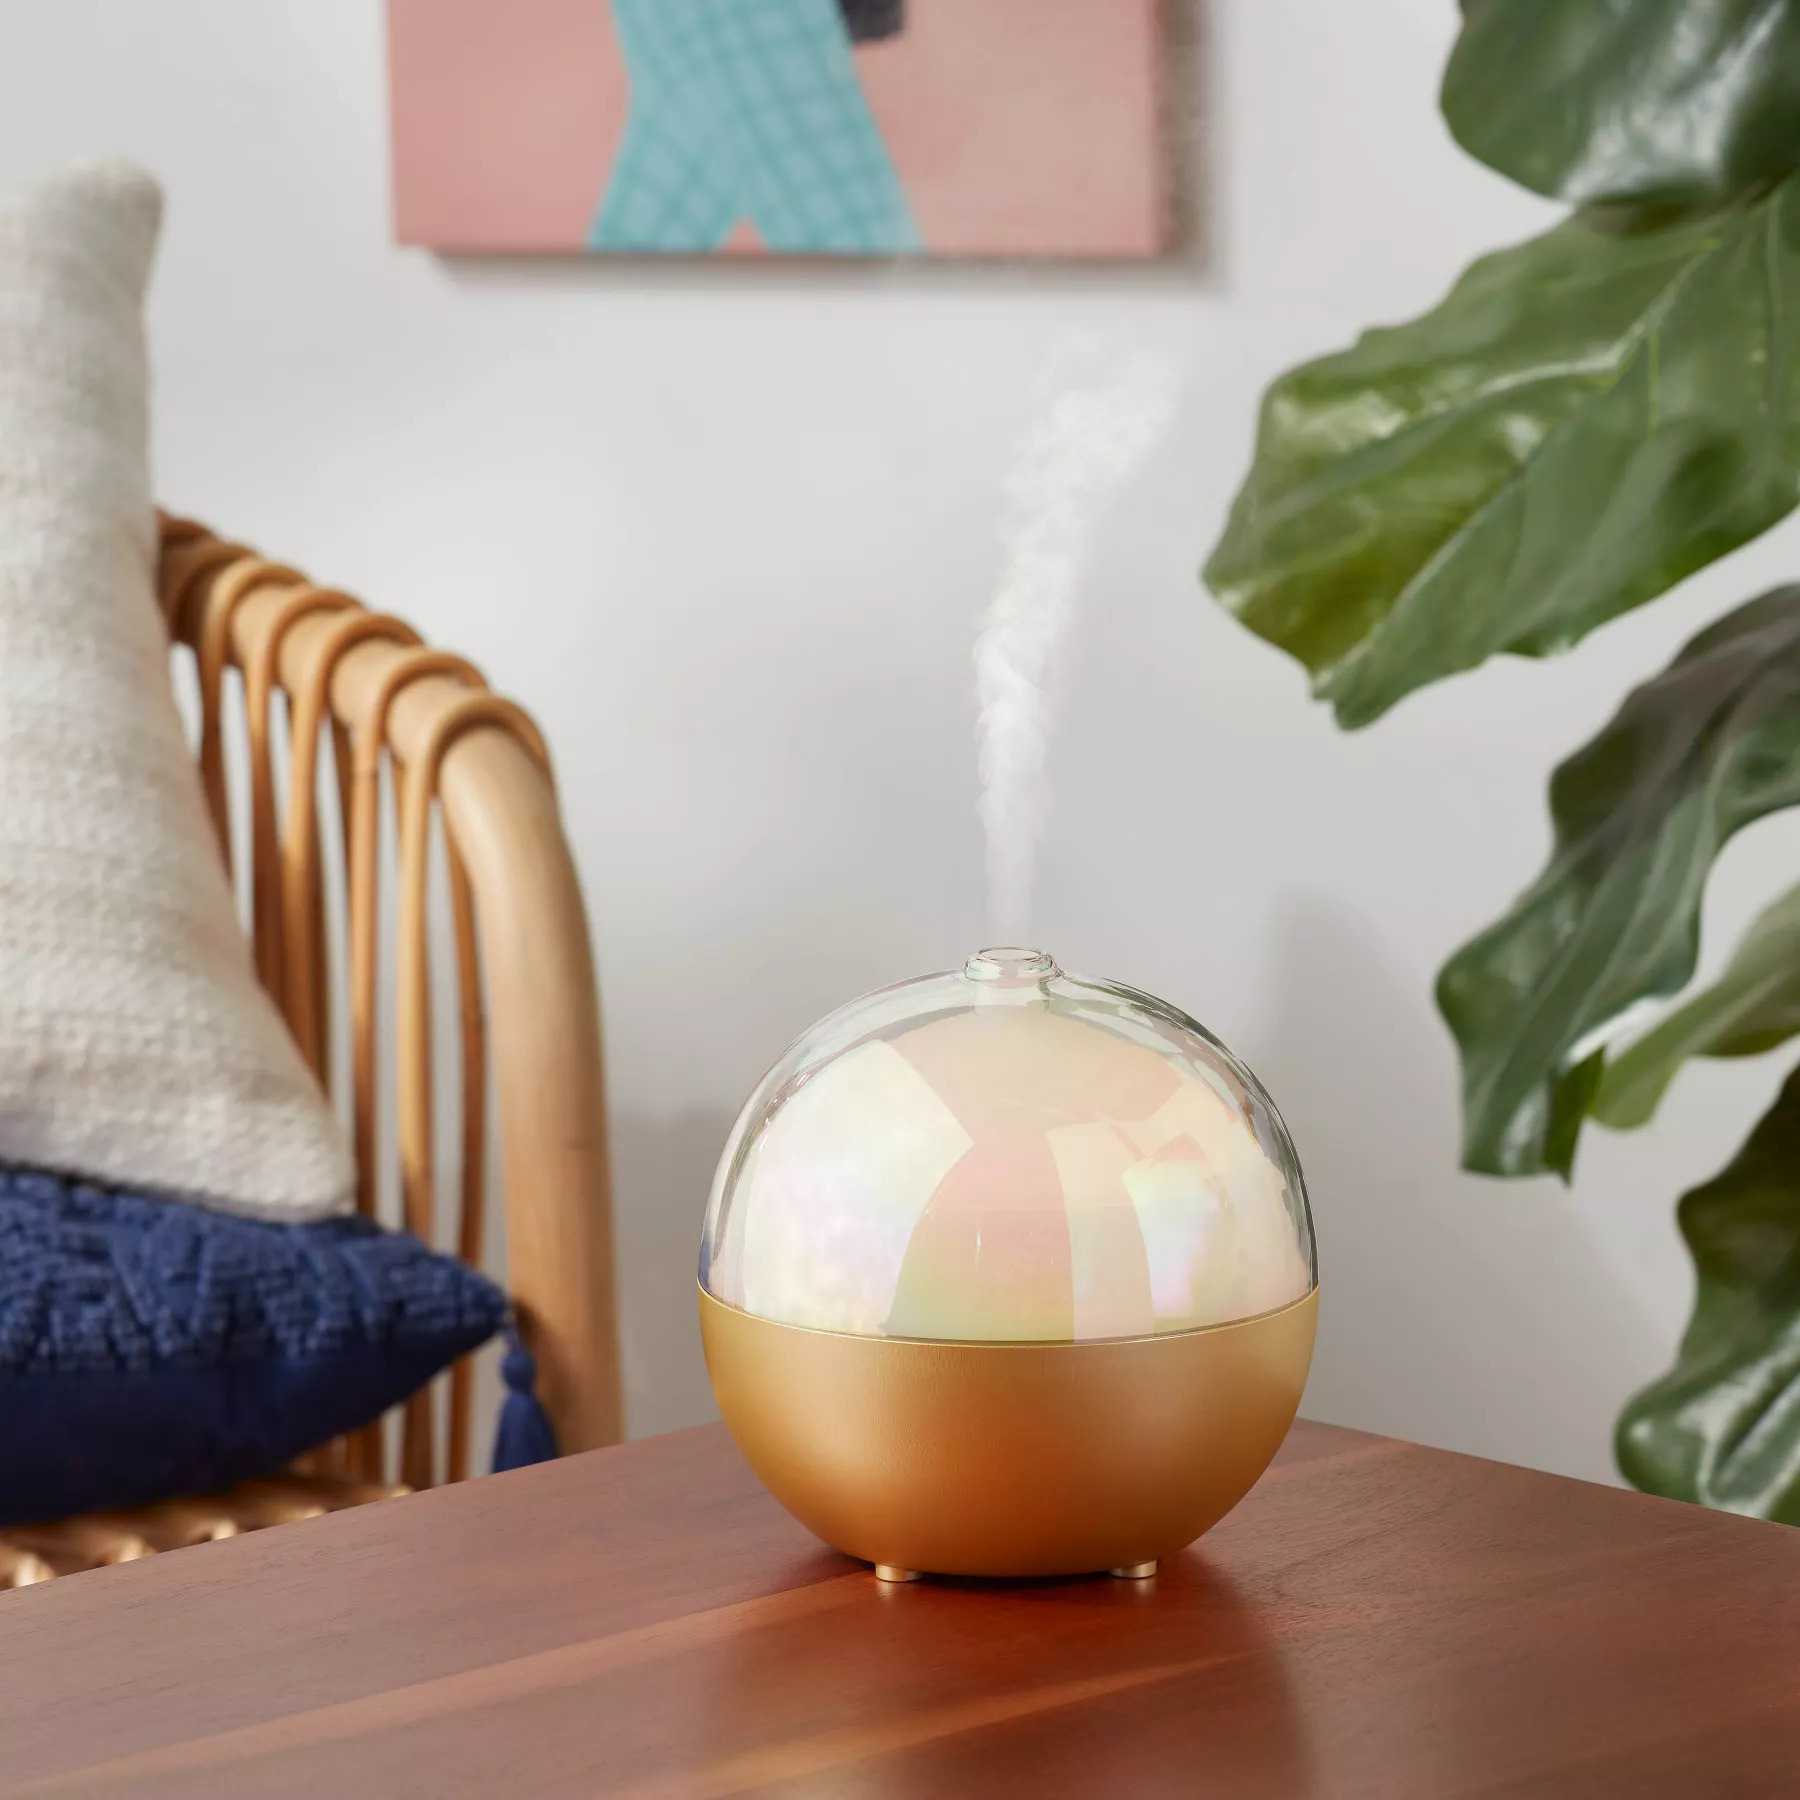 The spherical diffuser with a clear, iridescent top half and a gold-tone bottom